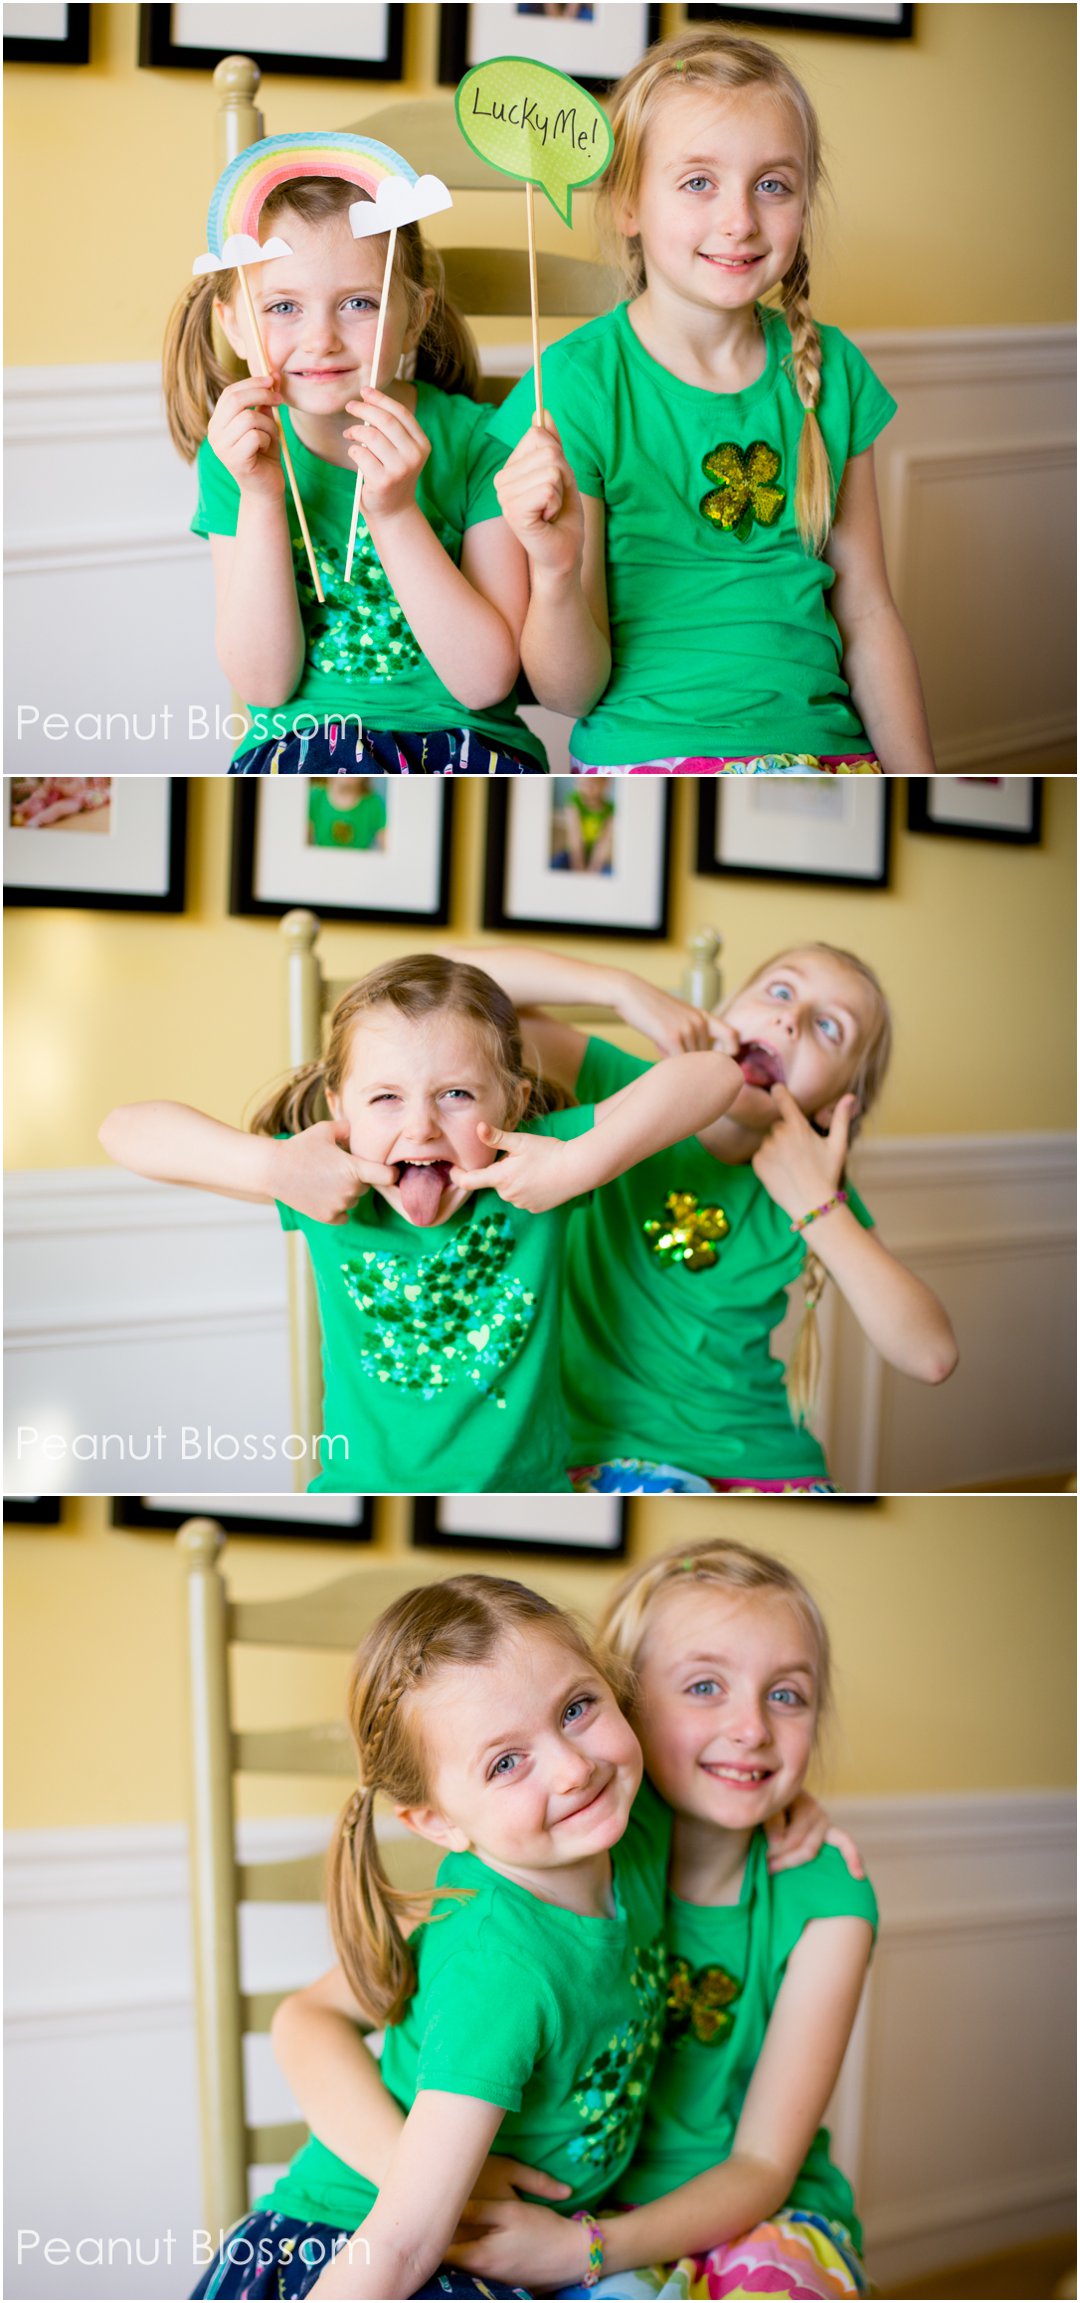 5 tricks for the most fun with St. Patrick for kids